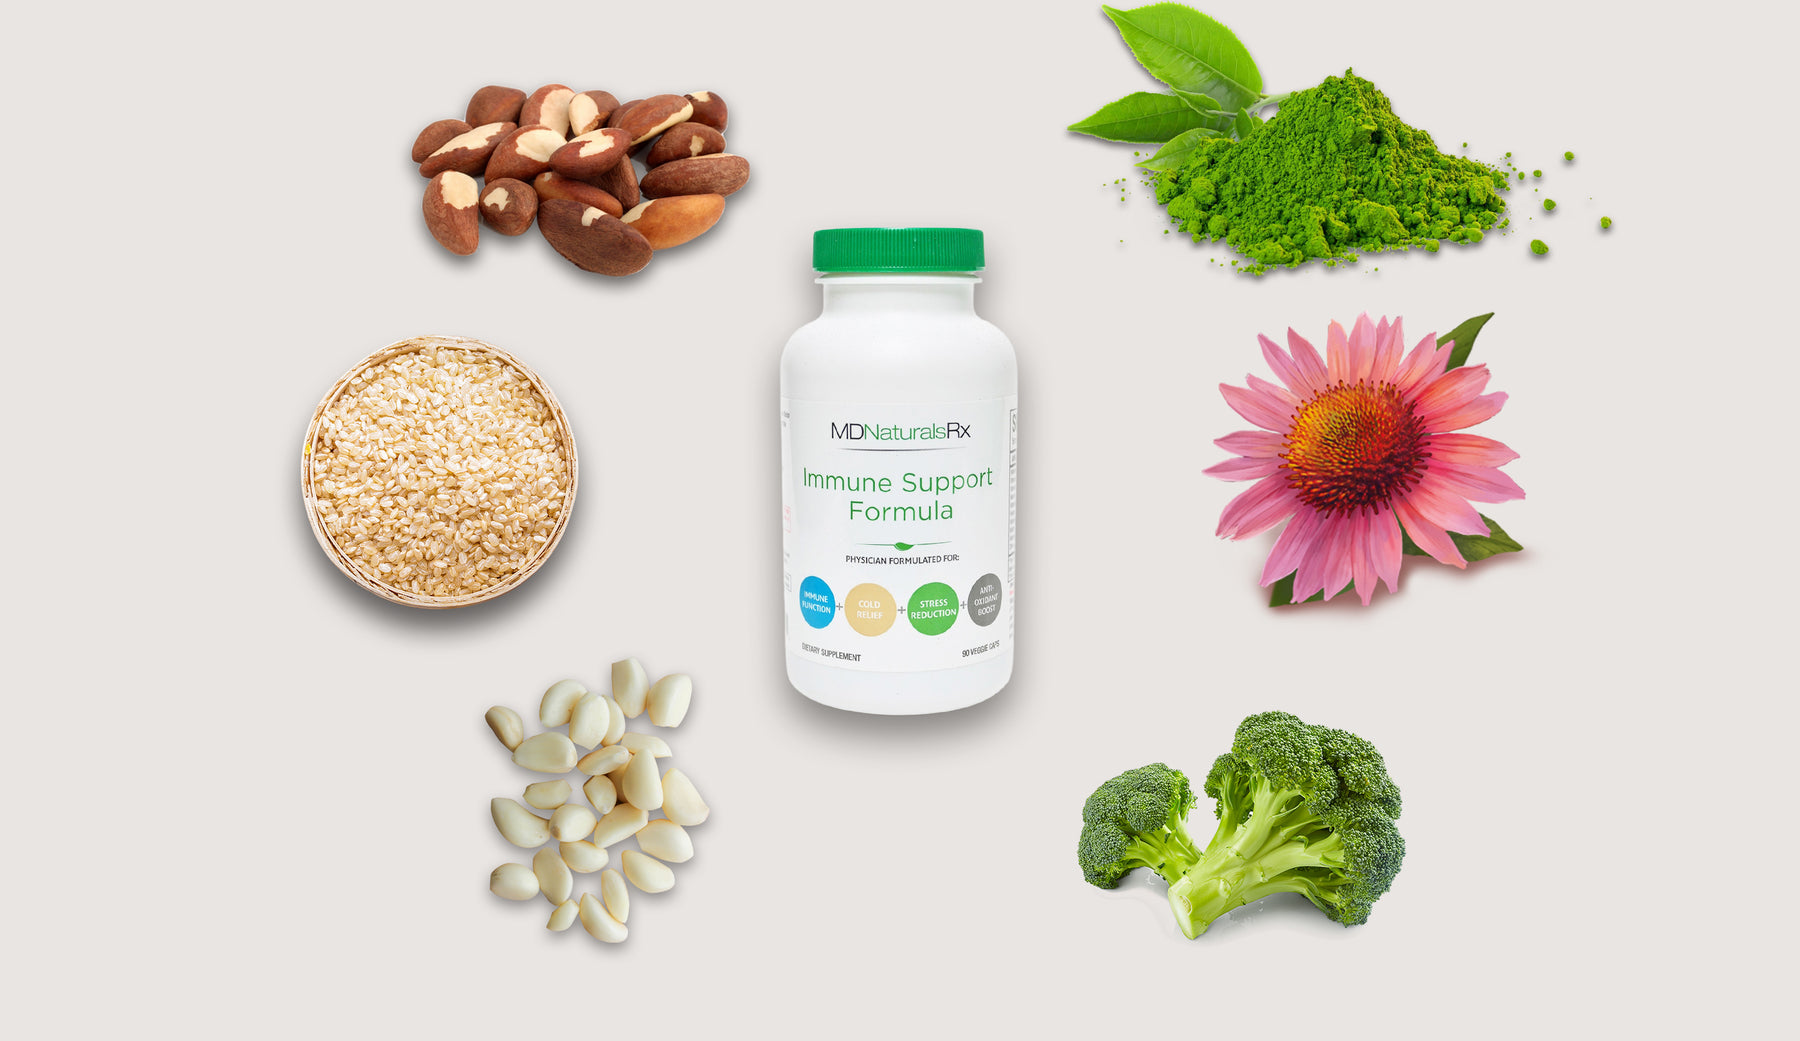 MDNaturalsRx | Immune Support Formula is a physician formulated Vegan supplement with 20 evidence-based ingredients designed to support immunity